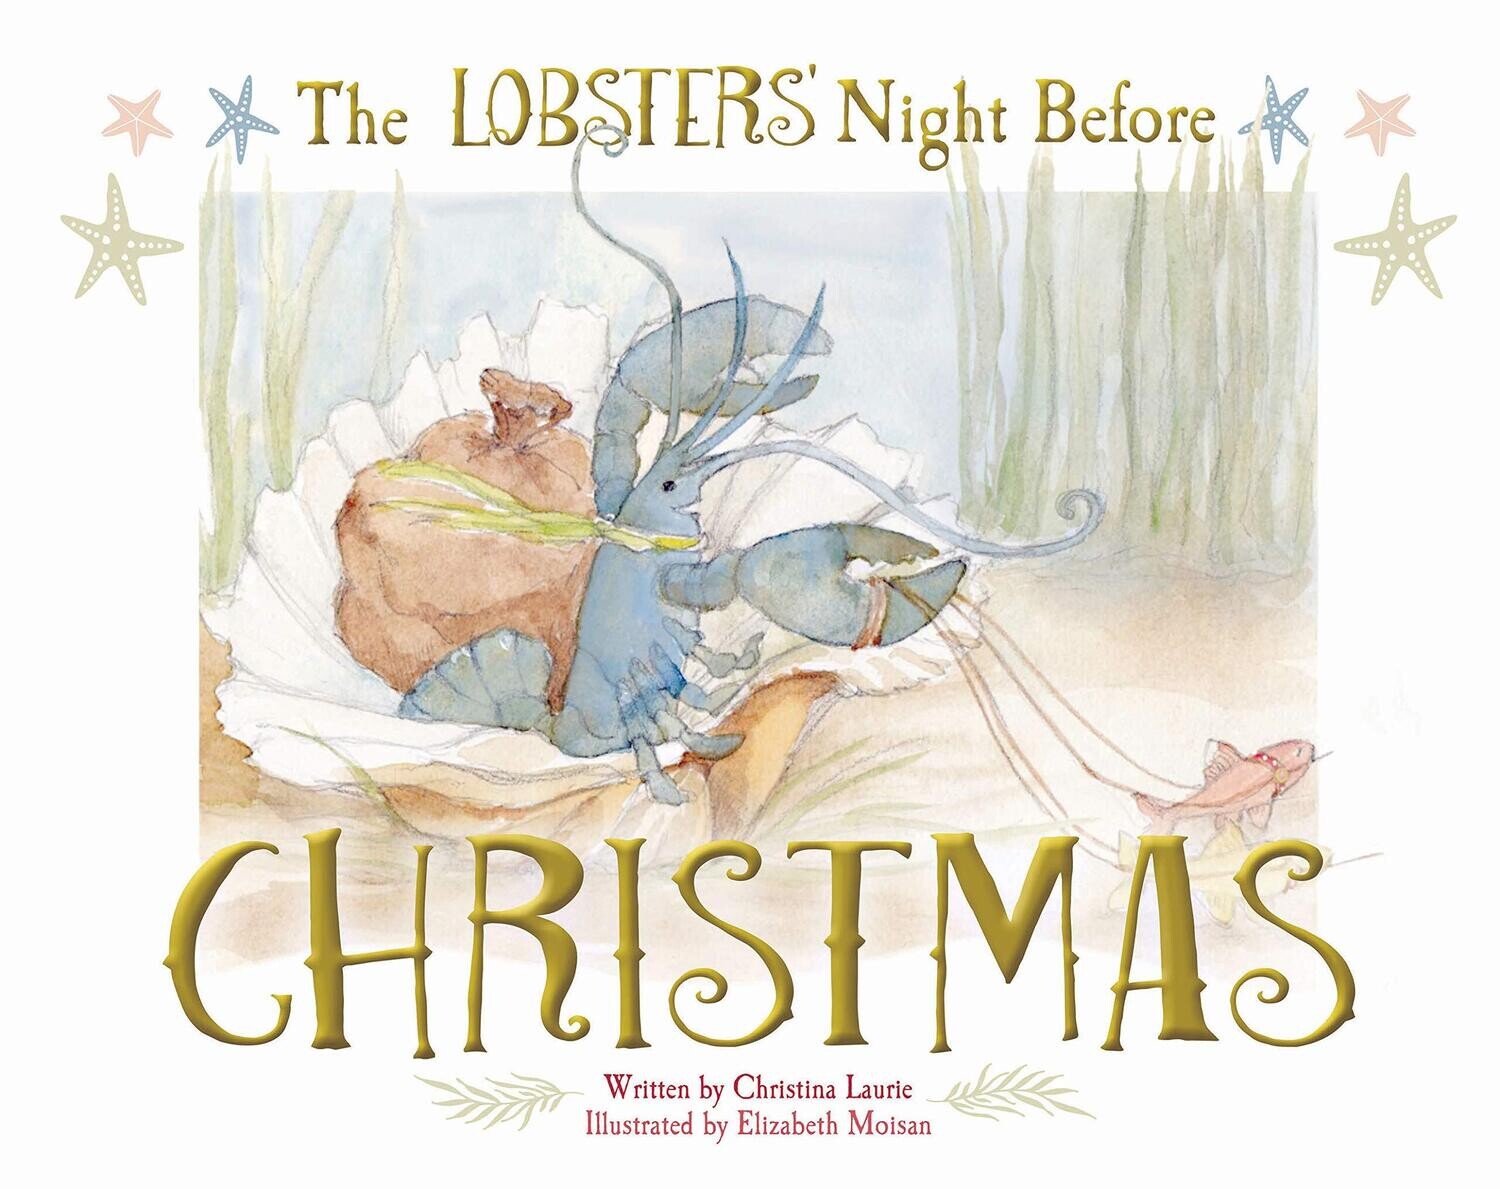 The Lobsters Night Before Christmas